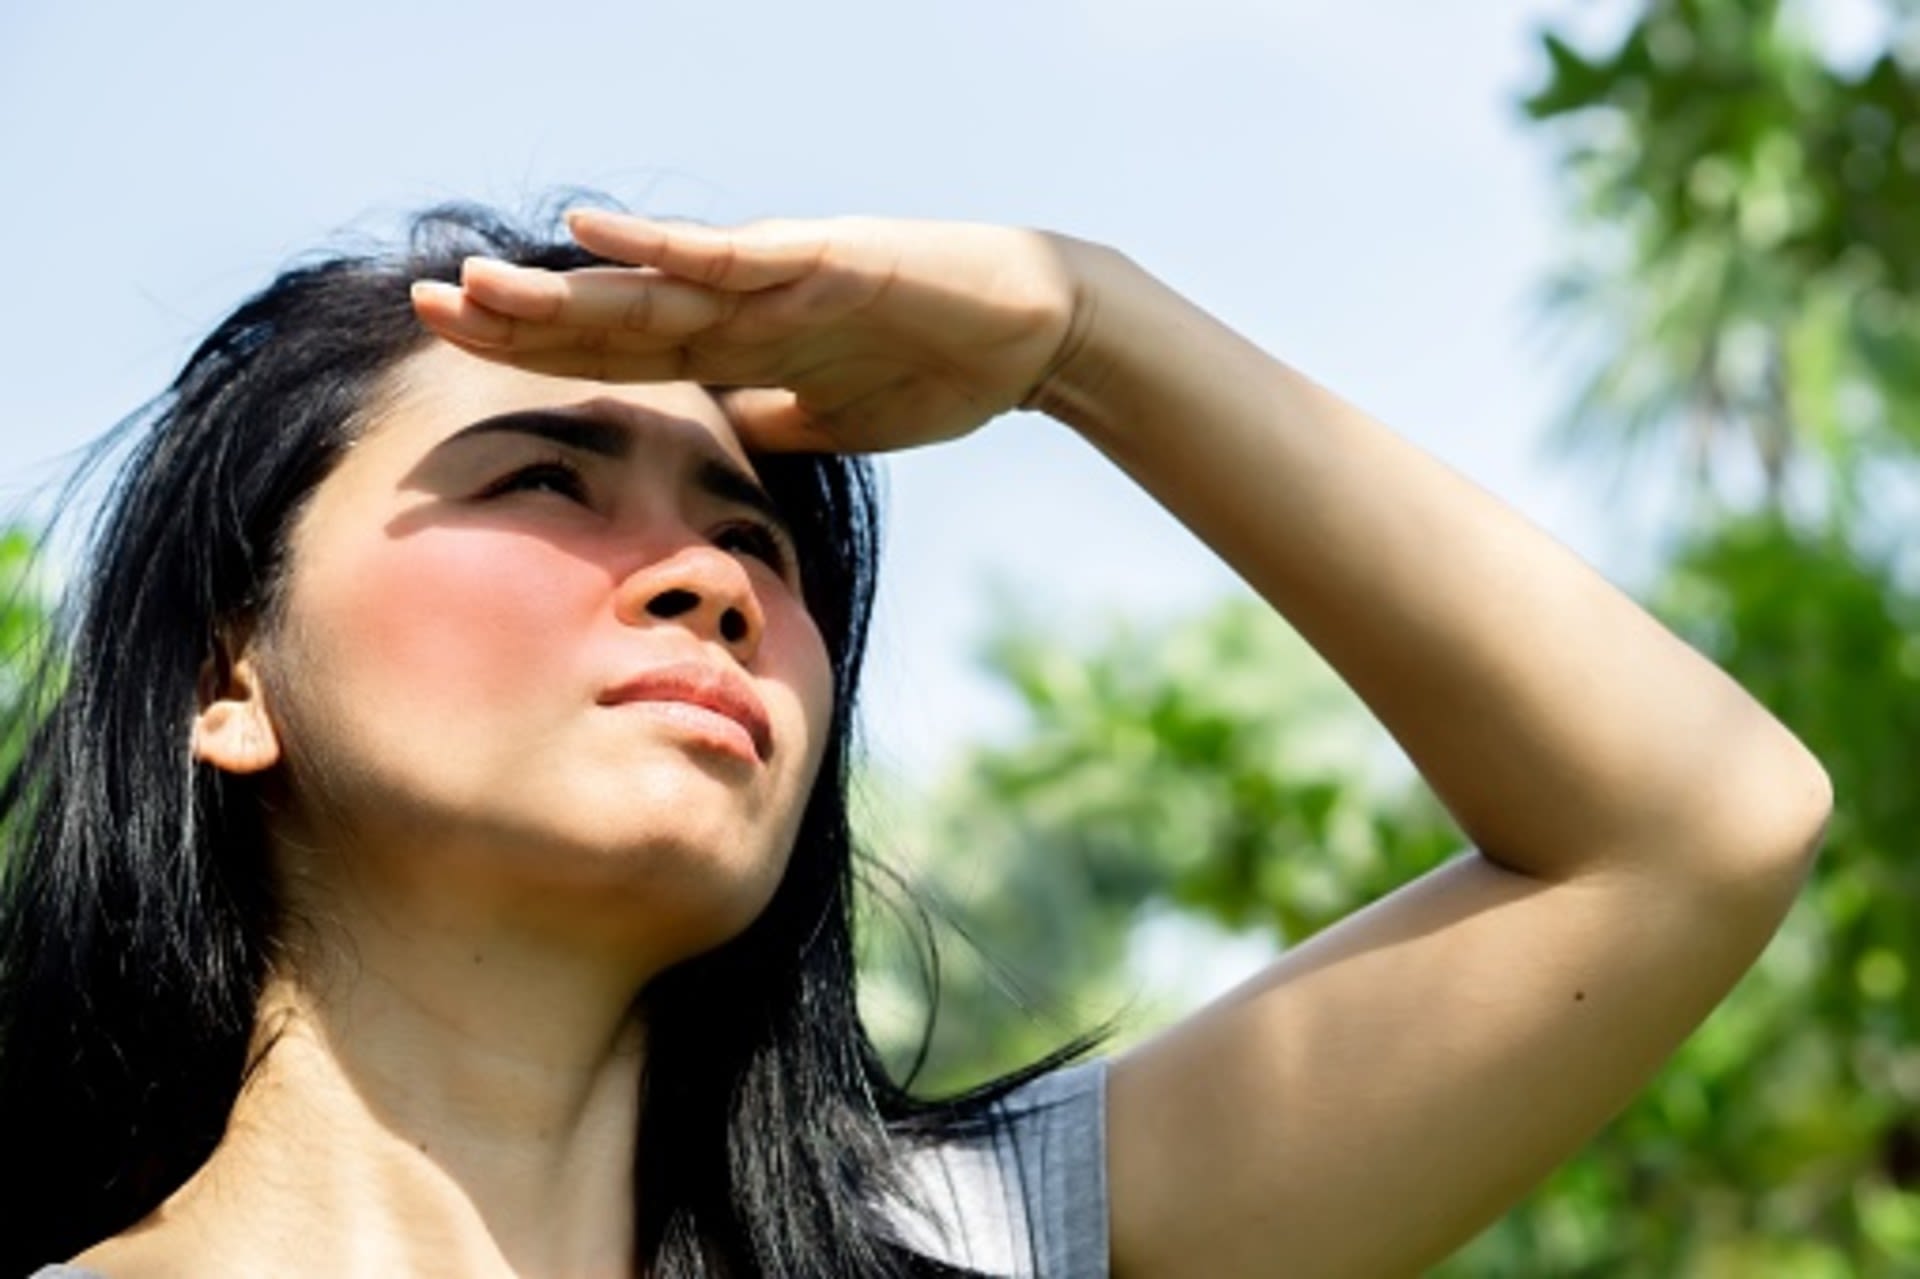 Stared at the Sun during the eclipse without protection? Symptoms to watch for